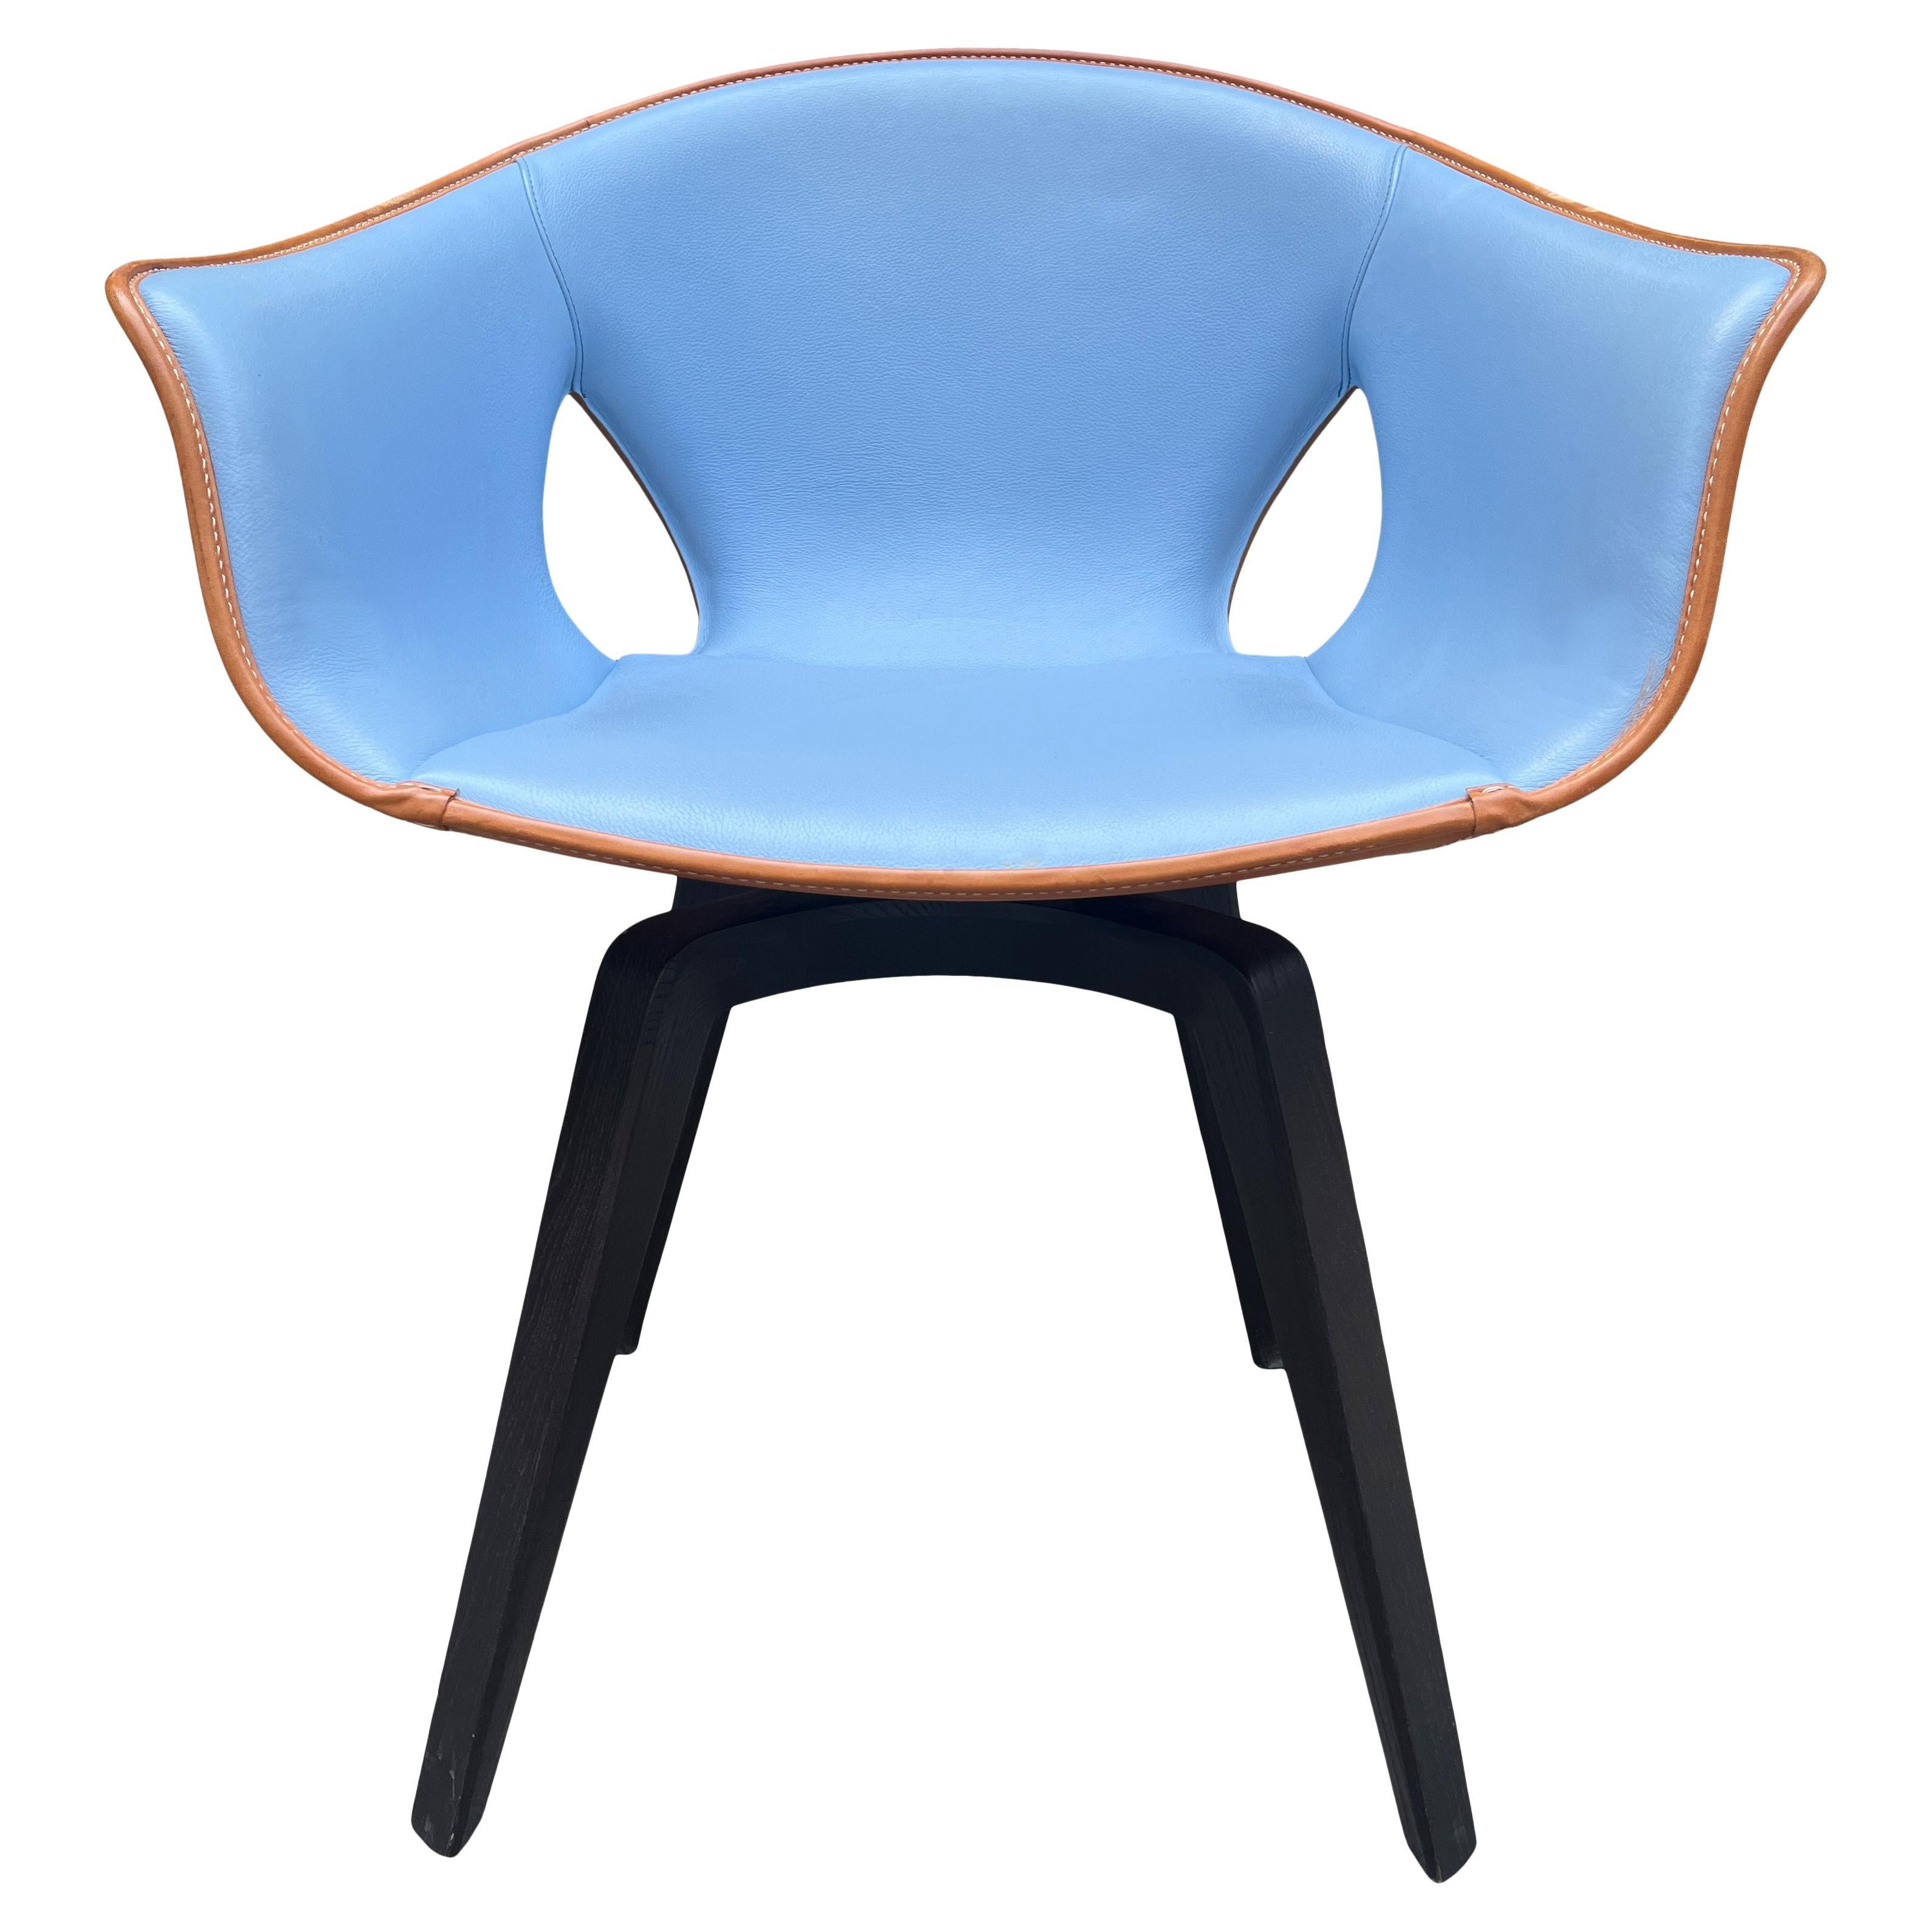 The Post-Modern Ginger chair by Roberto Lazzeroni for Poltrona Frau with featuring saddle brown and sky blue leather hand stitched. A gorgeous Modern look. Seat has ebonized wood swivel base. 